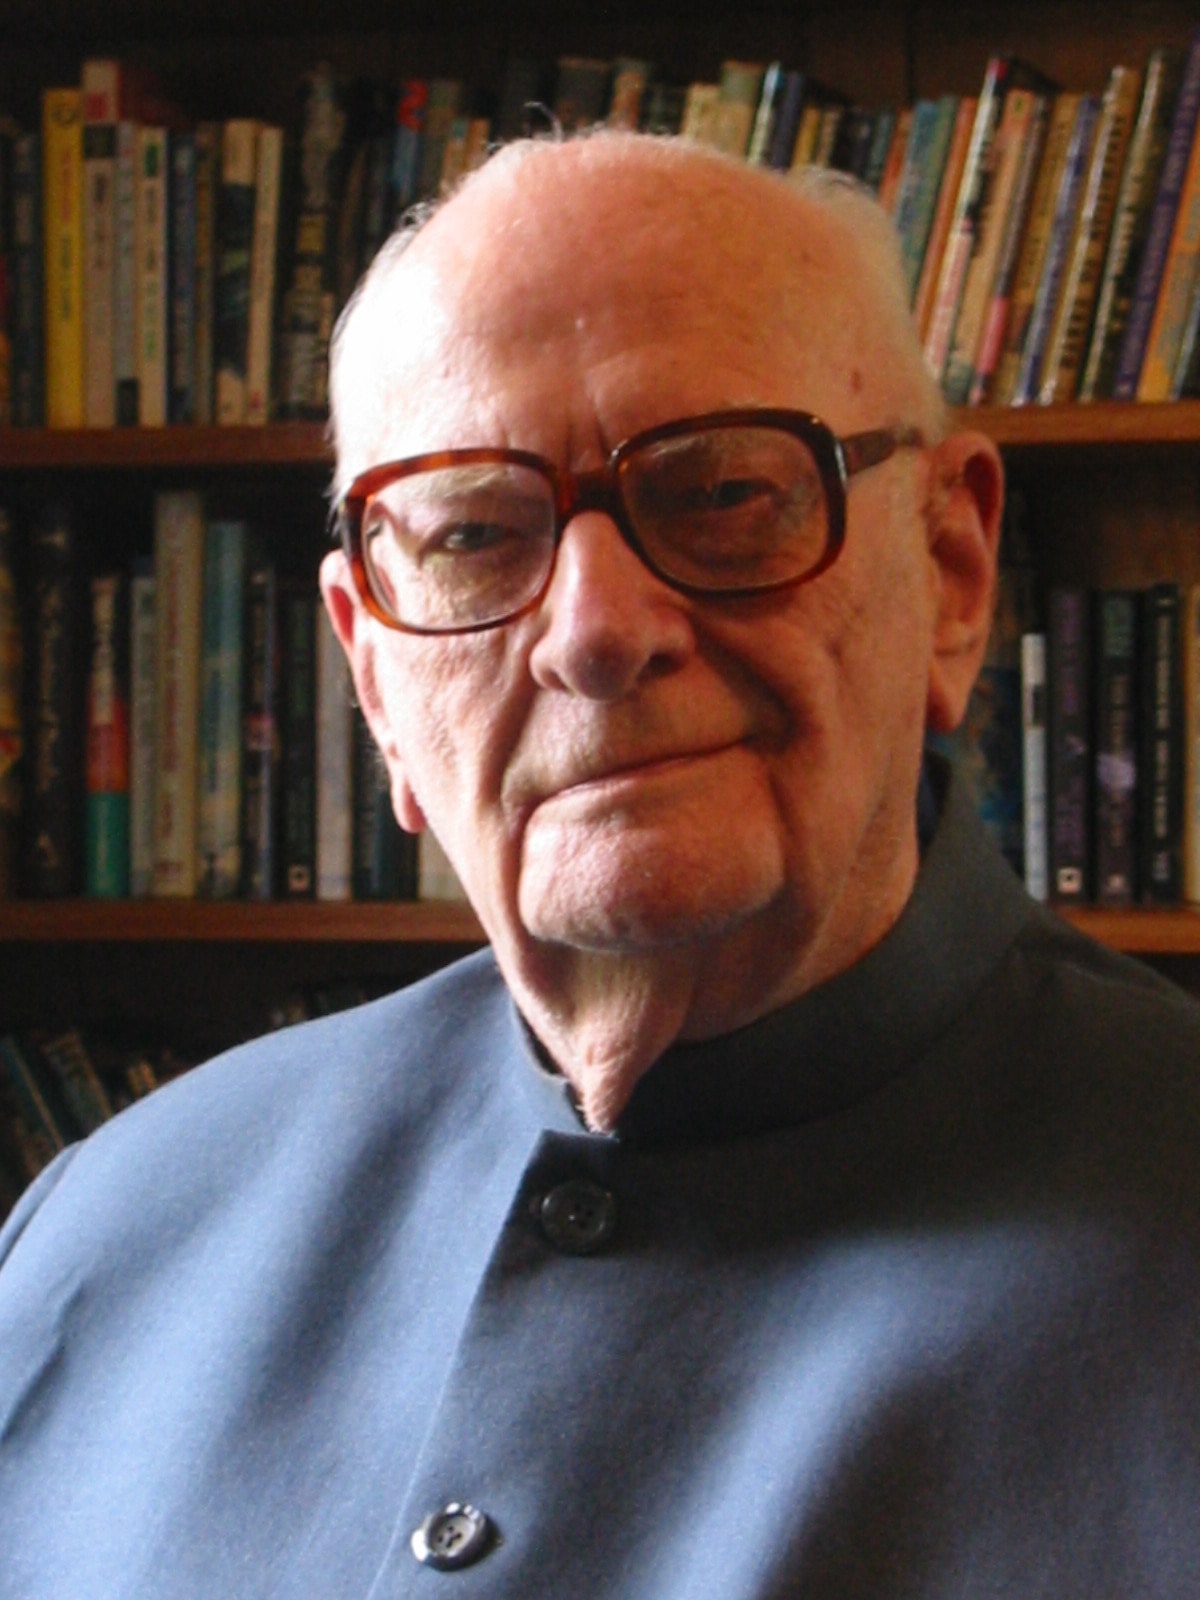 View the biography of Arthur C. Clarke